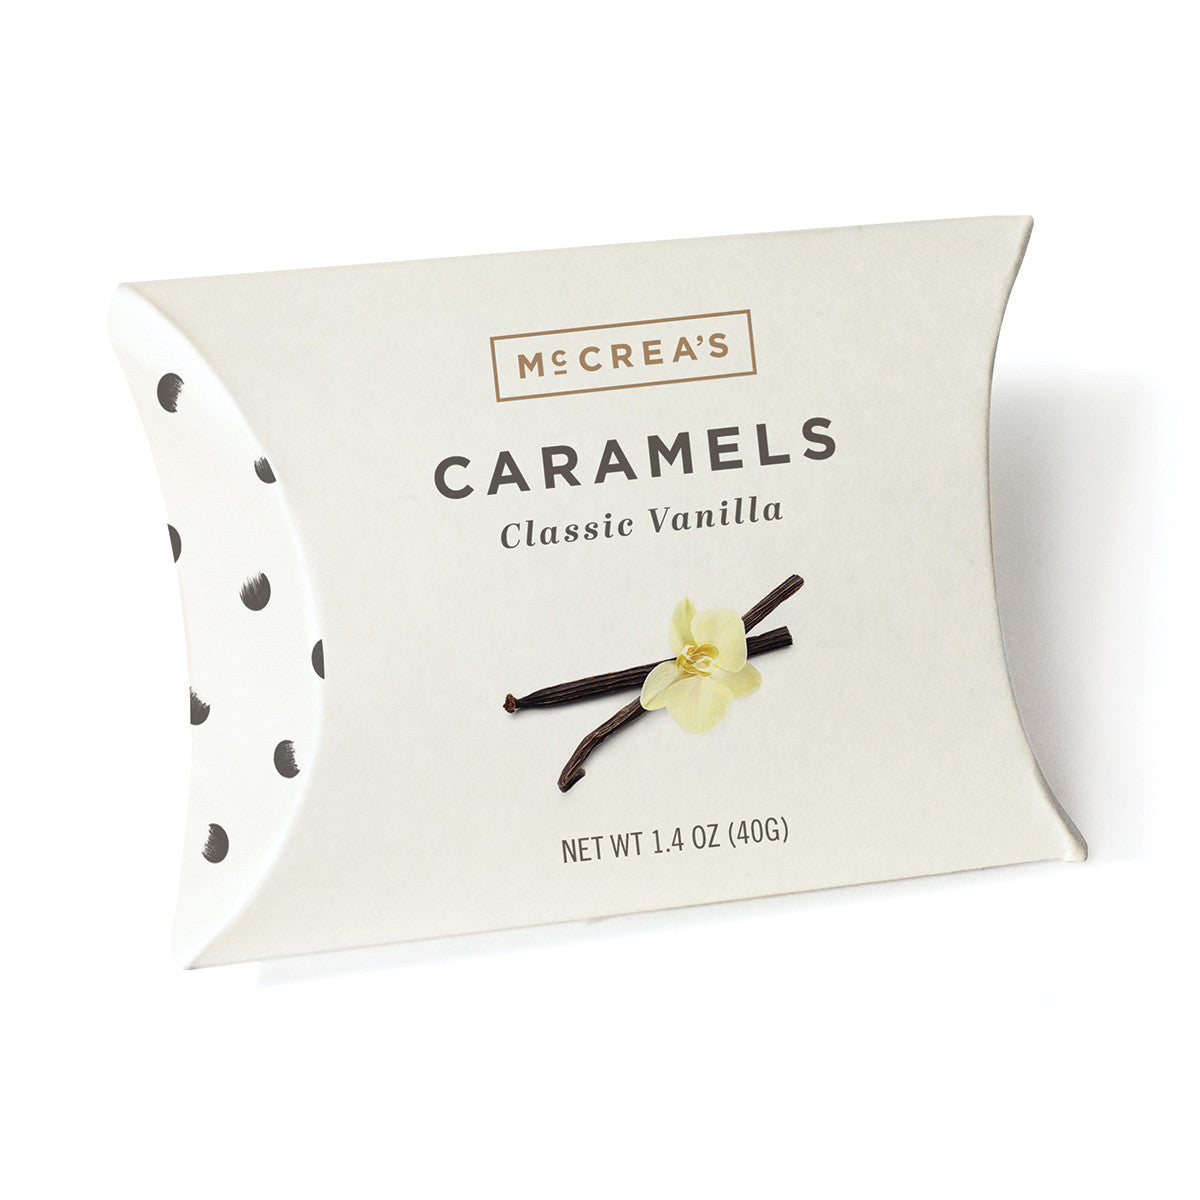 McCrea's Caramels Classic Vanilla Pillow - 5 Pieces - Heart of the Home LV